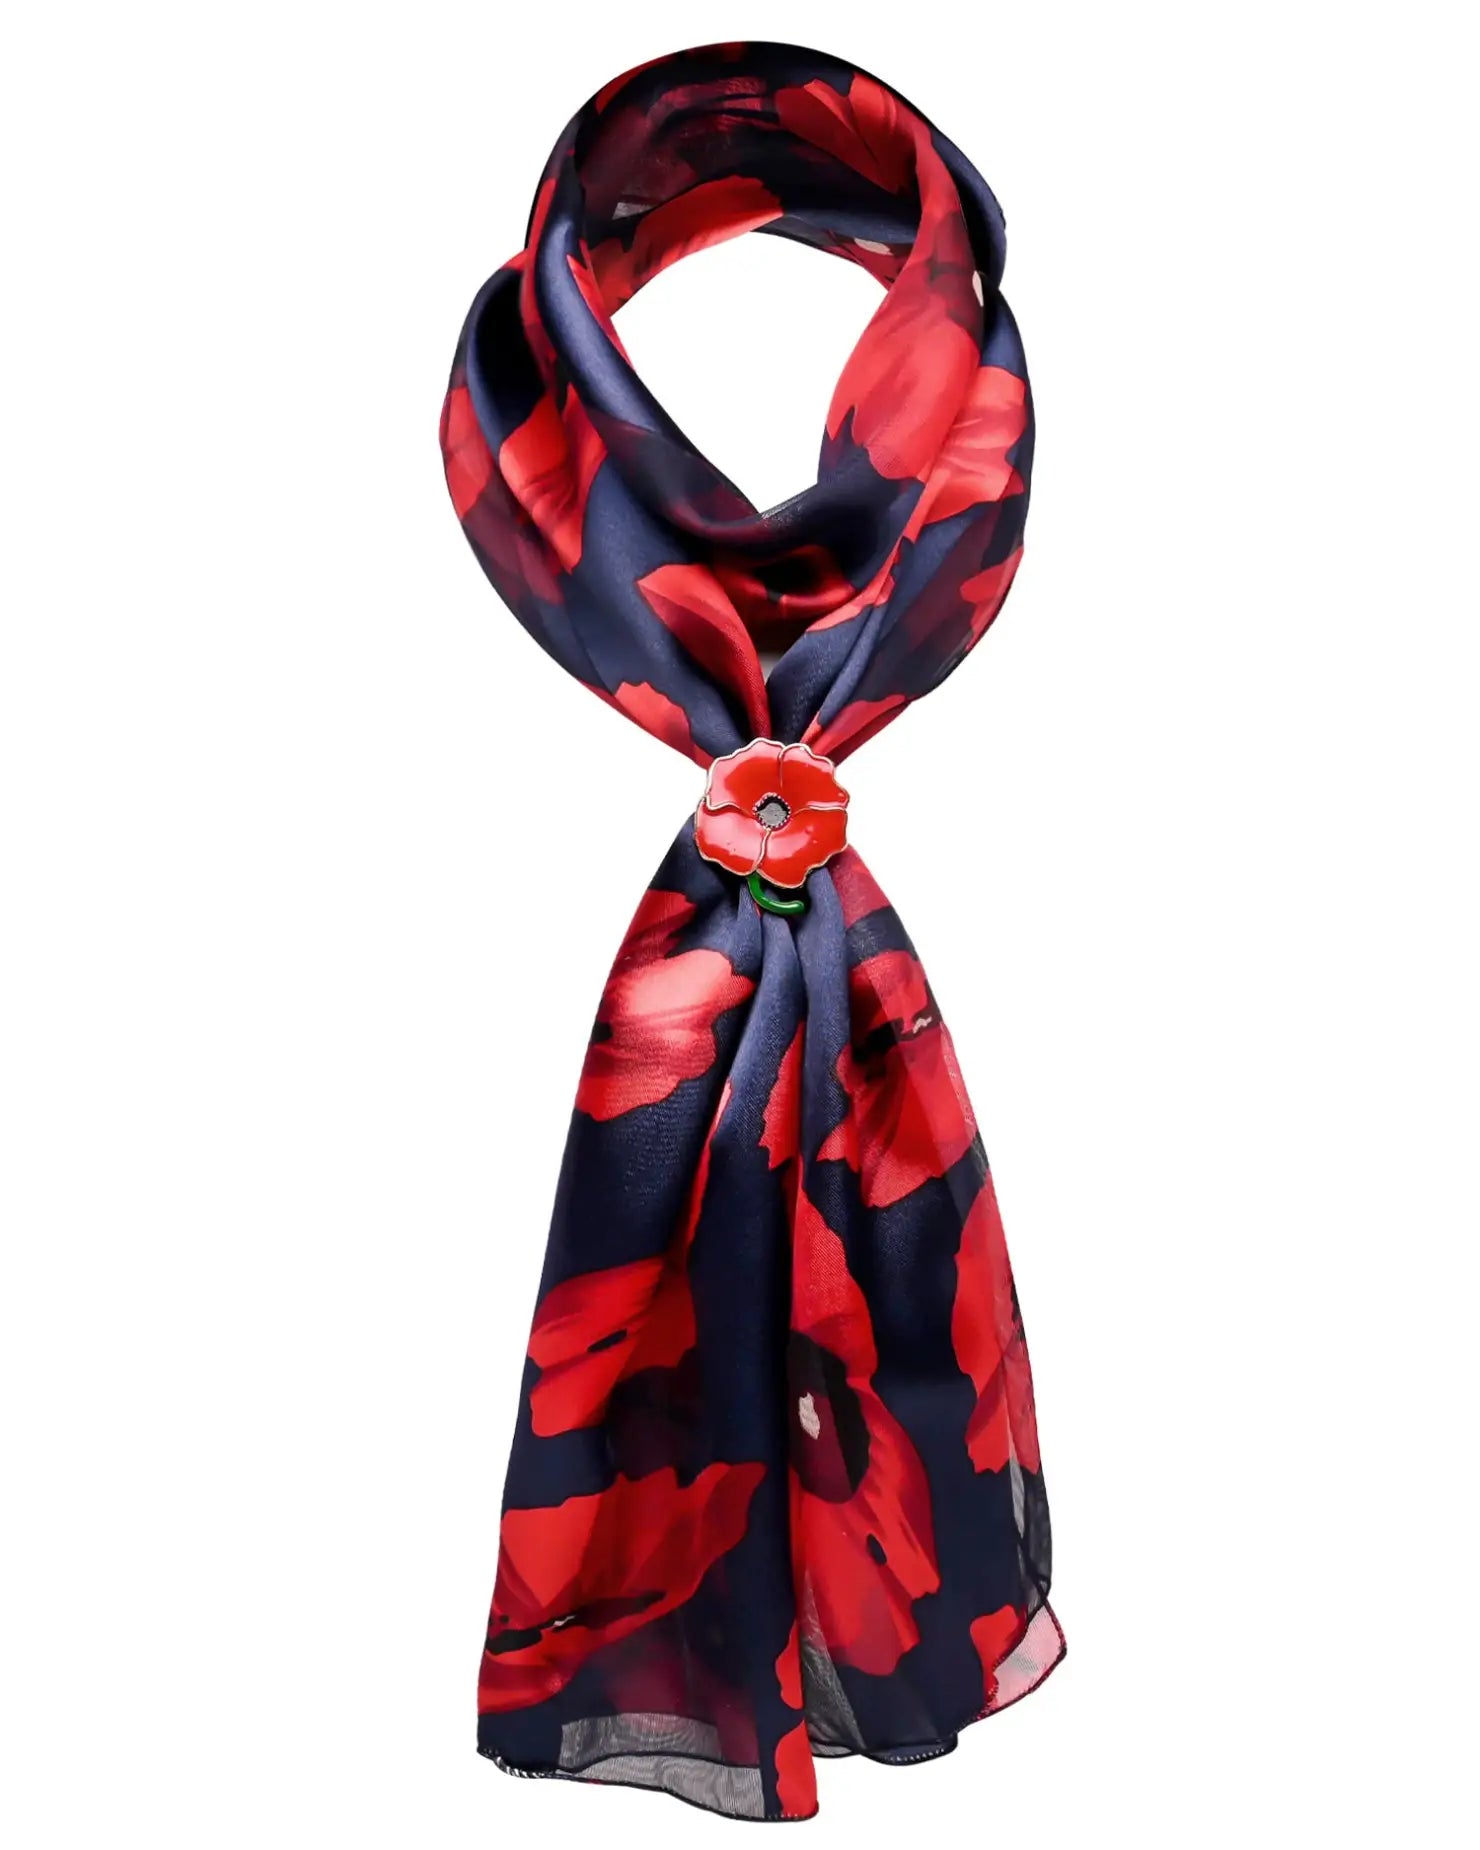 Red and blue poppy floral print scarf with flower design - part of a set with gold plated ring.